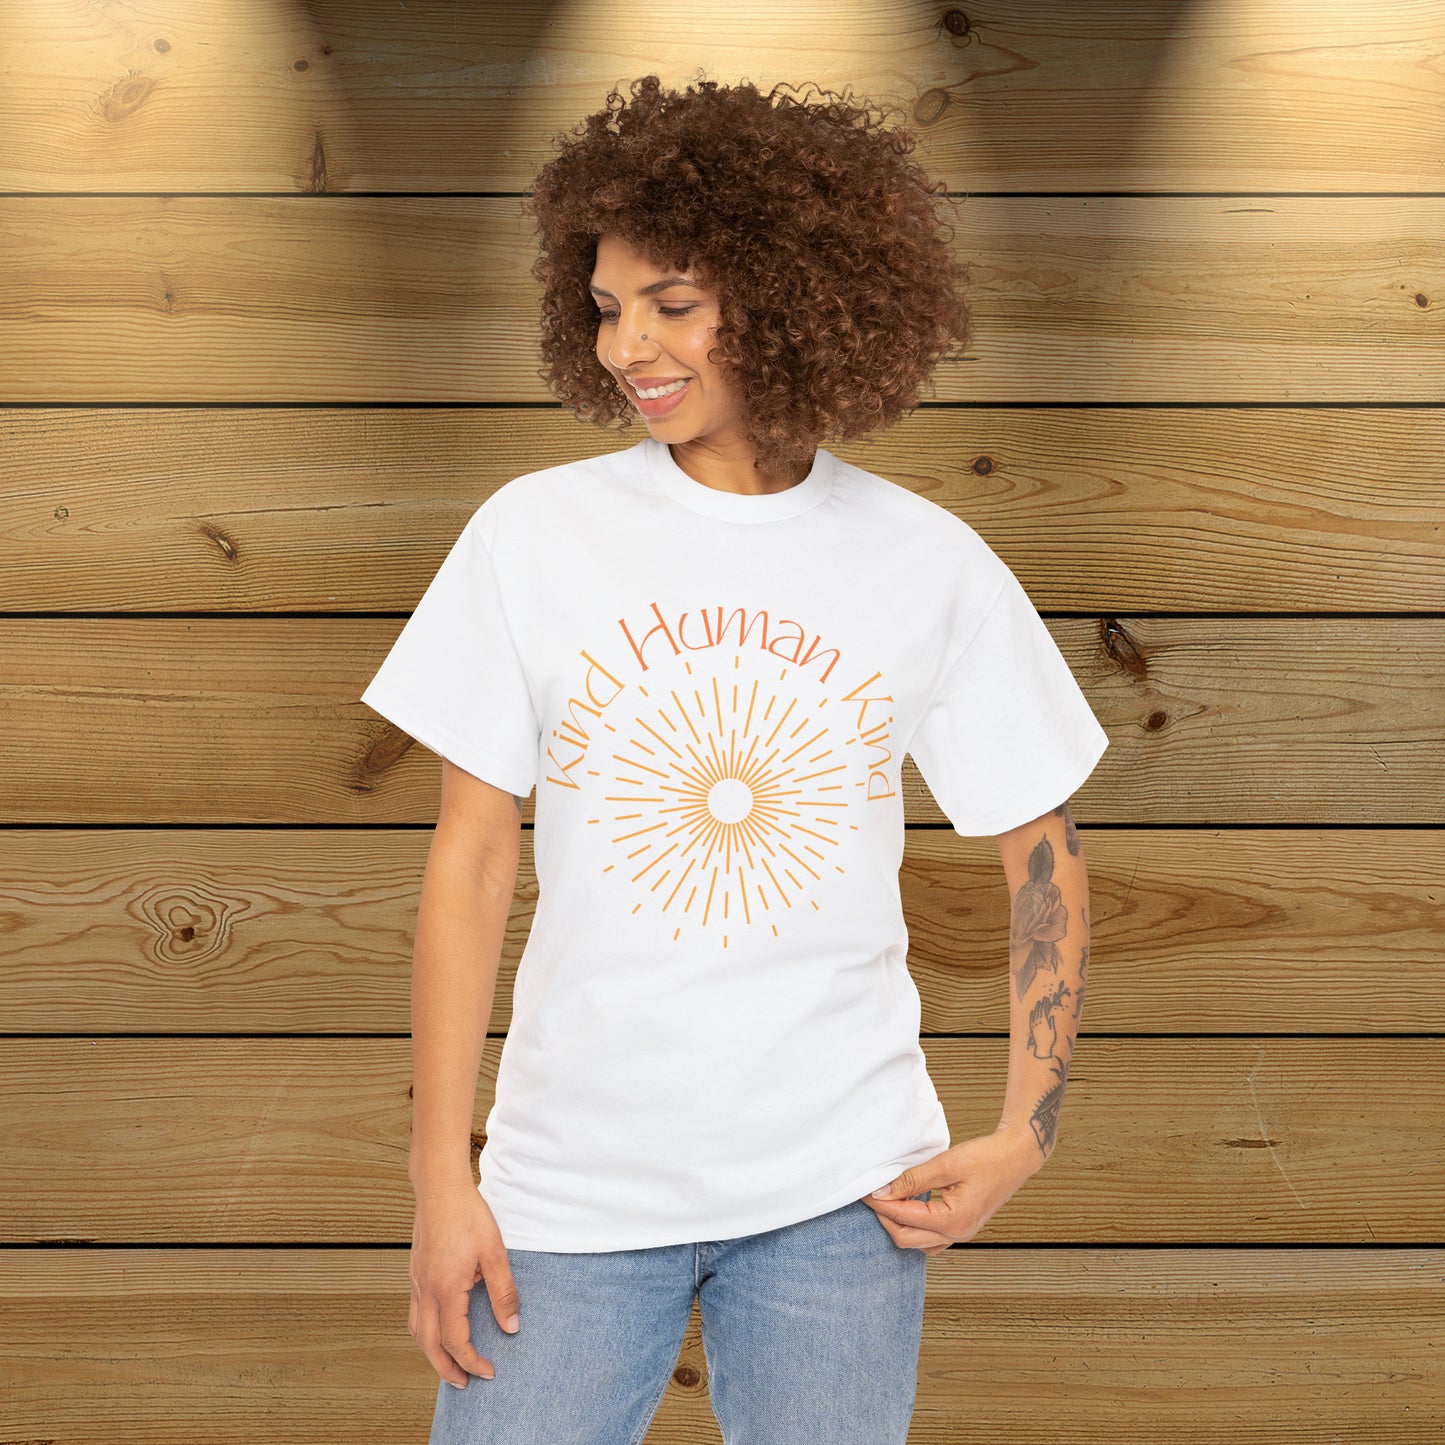 Kind Human Not Aggressive. POWERFUL™️ Unisex Heavy Cotton Tee classic fit